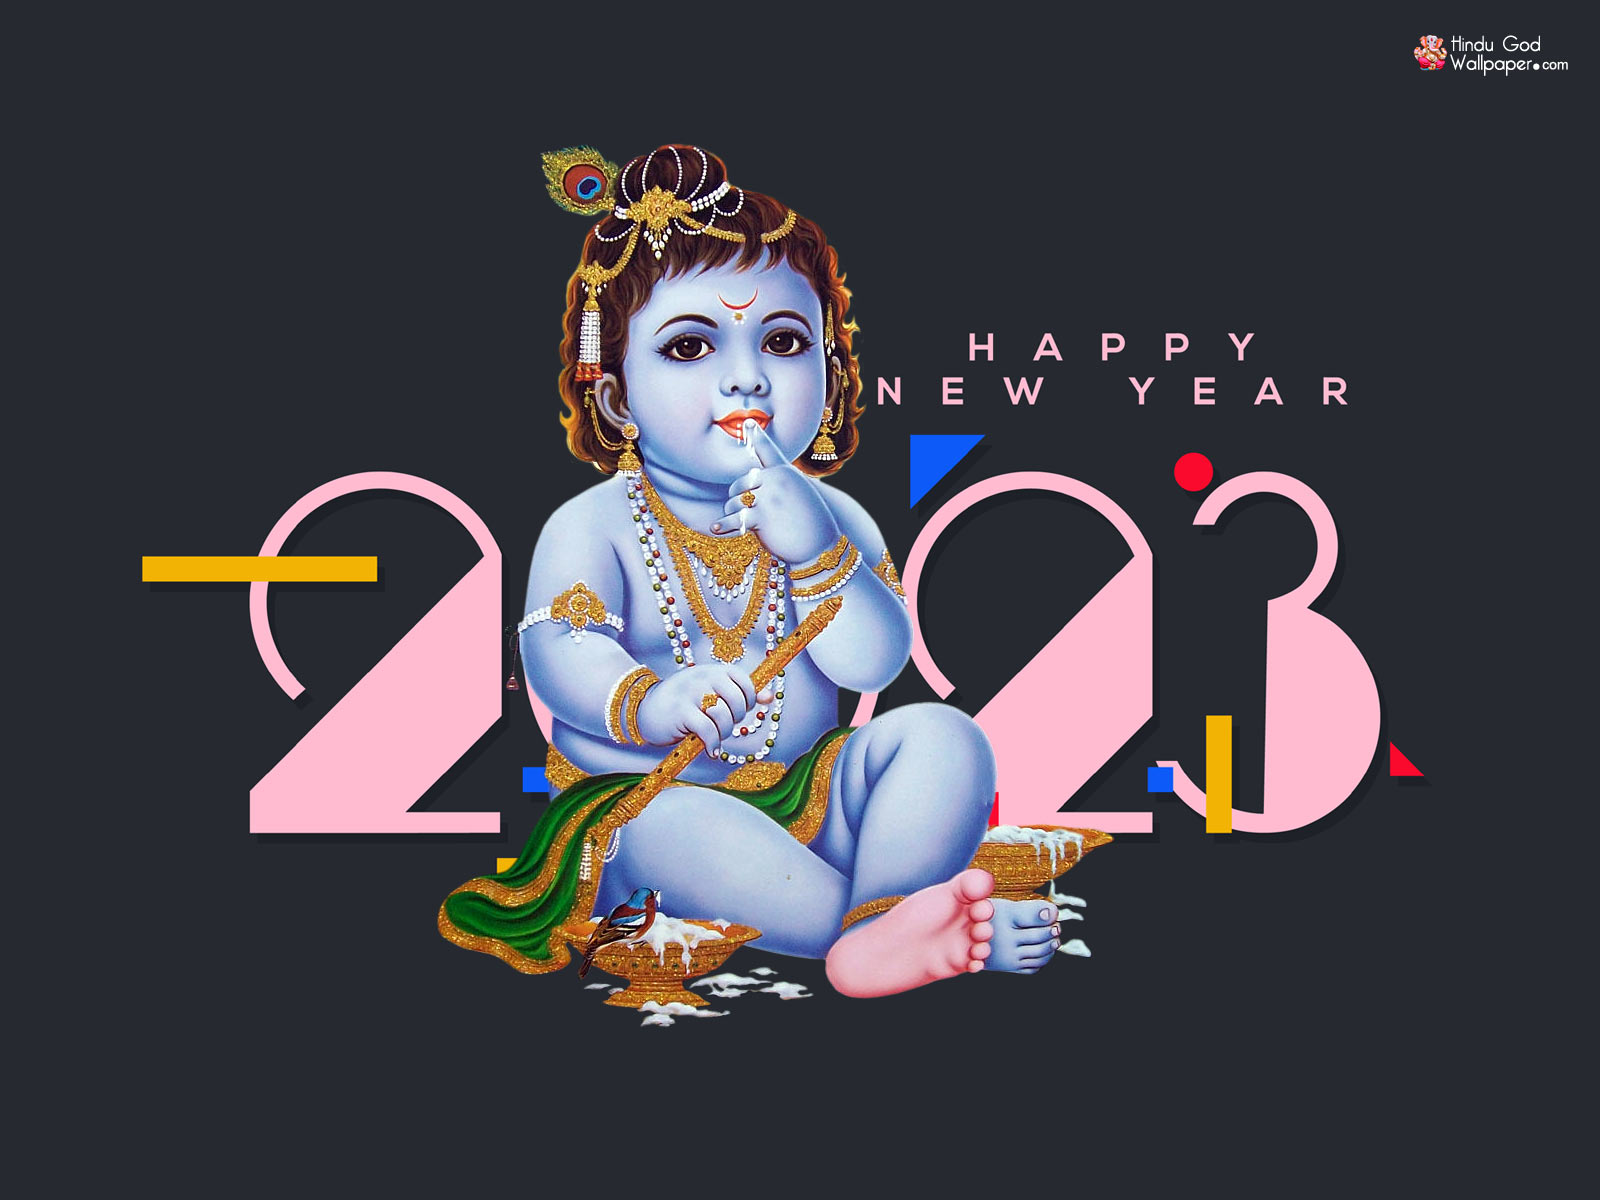 Happy New Year 2023 HD Wallpaper and Images Free Download